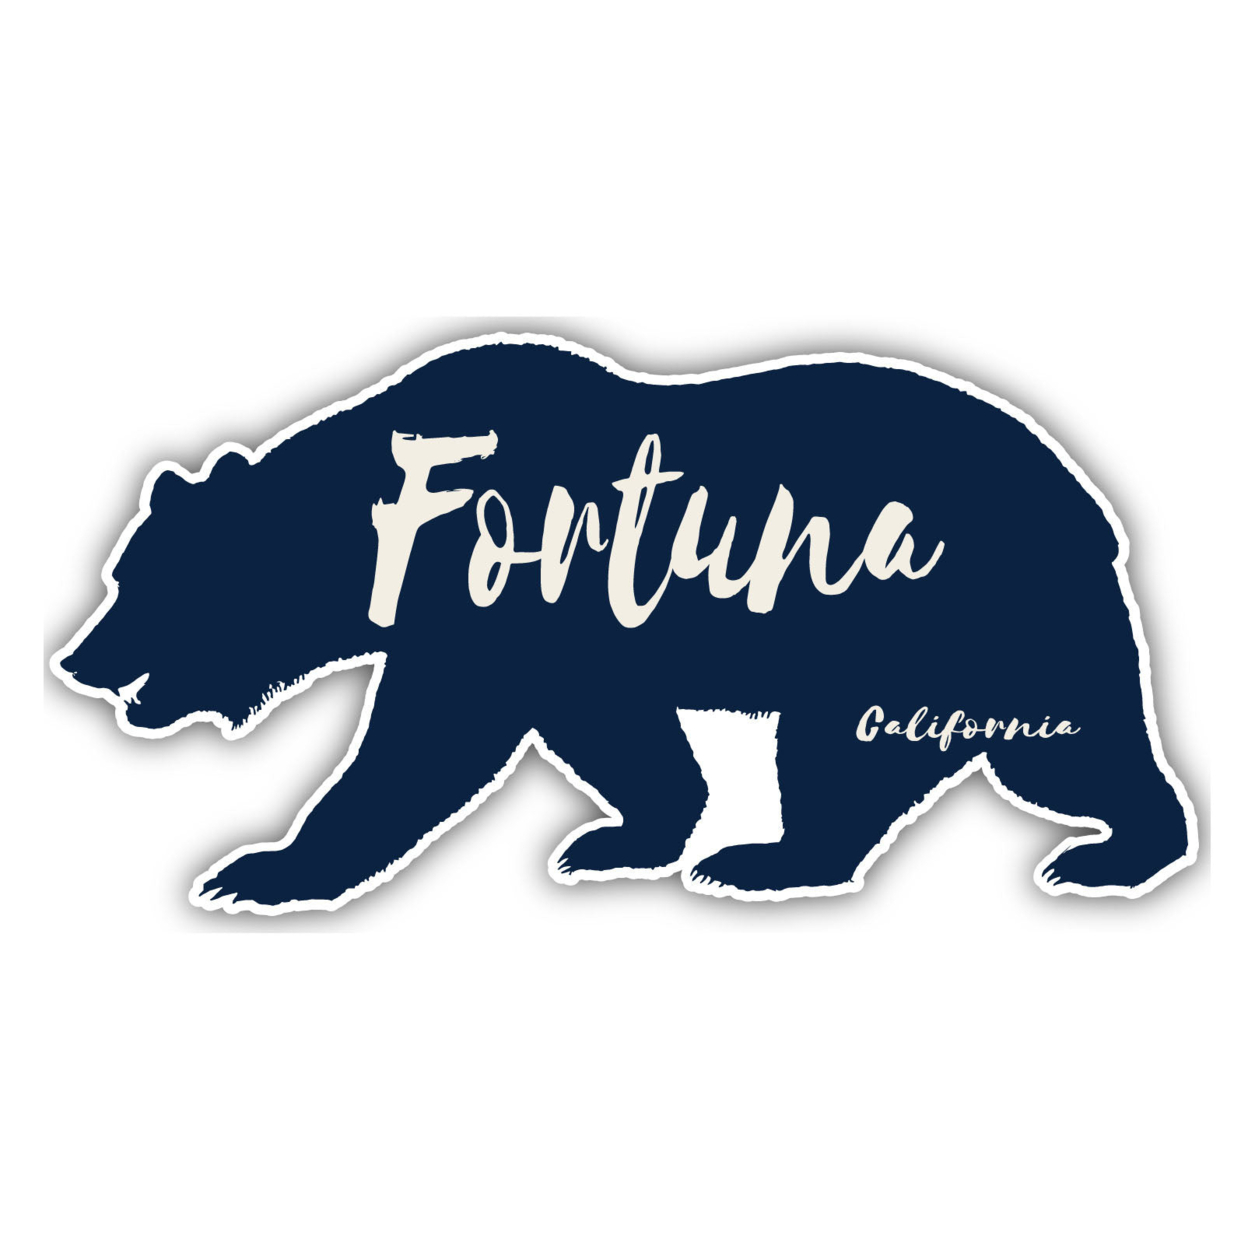 Fortuna California Souvenir Decorative Stickers (Choose Theme And Size) - 4-Pack, 6-Inch, Bear